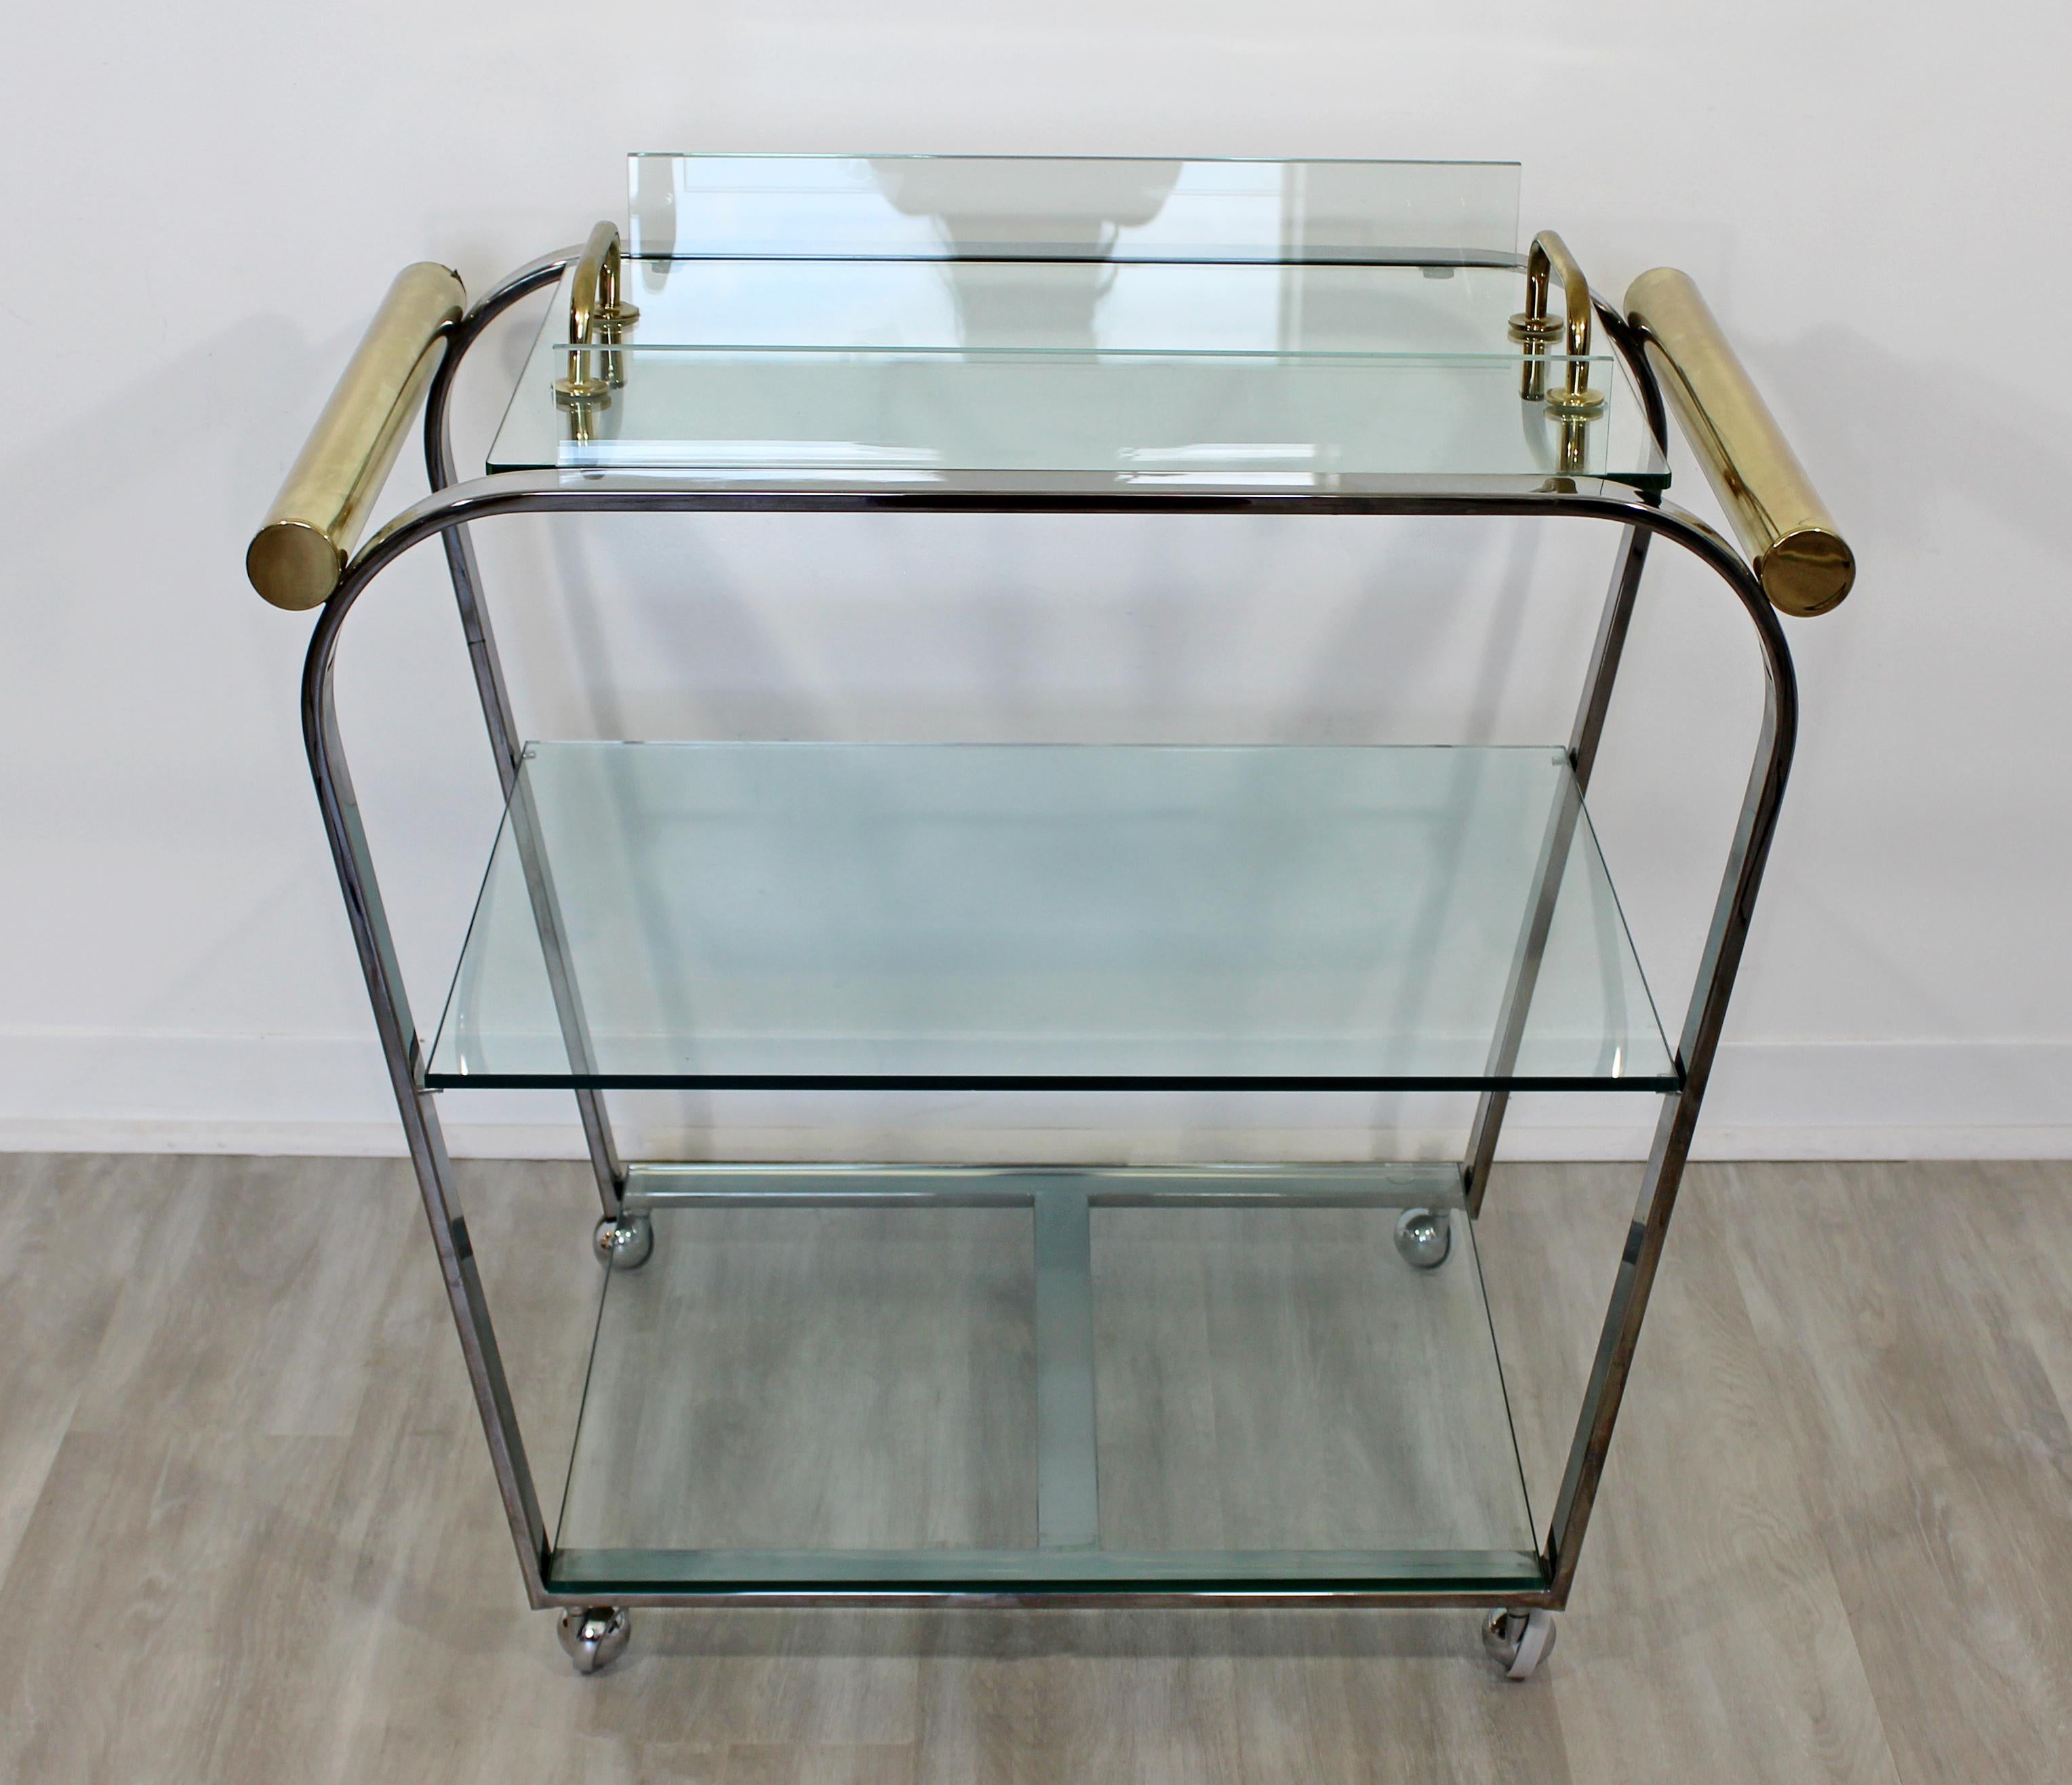 For your consideration is a romantically rounded bar or serving cart, with a removable tray top, made of brass, chrome and glass, for the Design Institute of America, circa 1970s. In very good vintage condition. The dimensions are 33.5